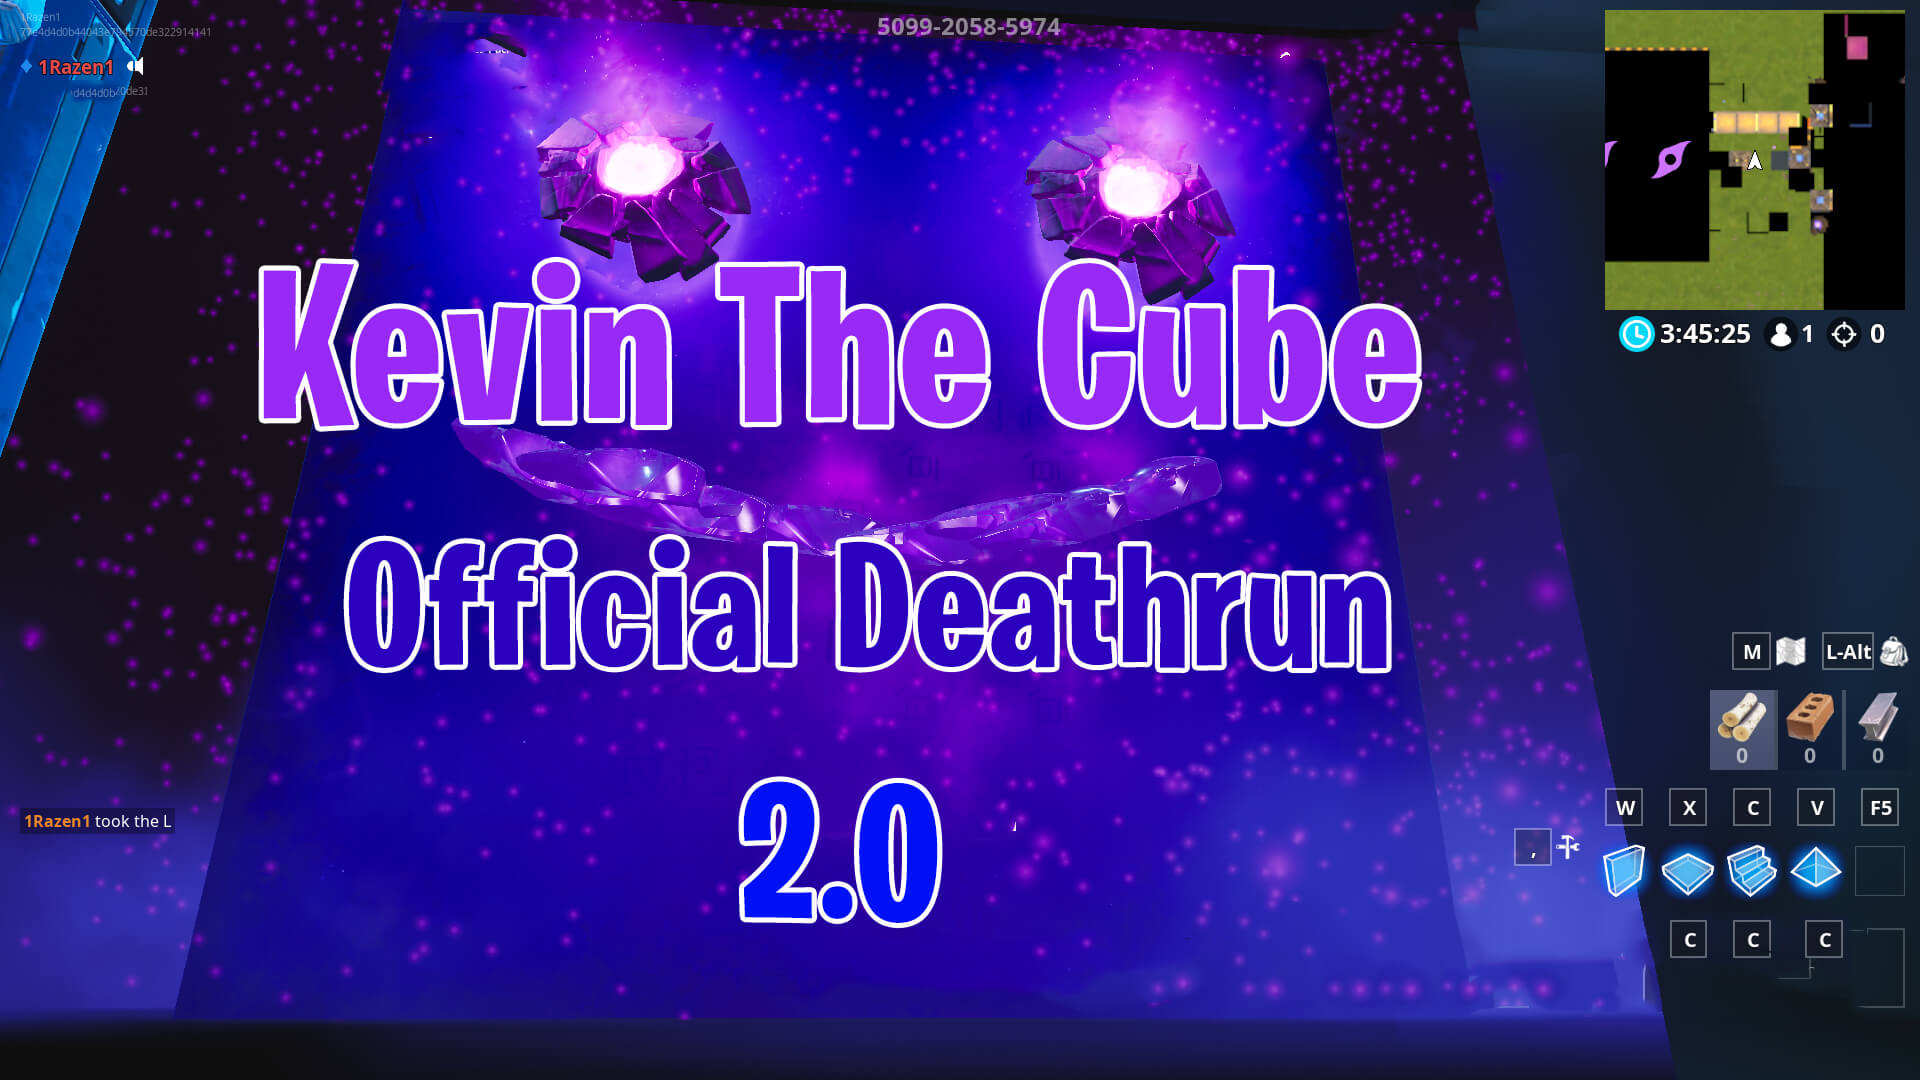 KEVIN THE CUBE OFFICIAL DEATHRUN 2.0